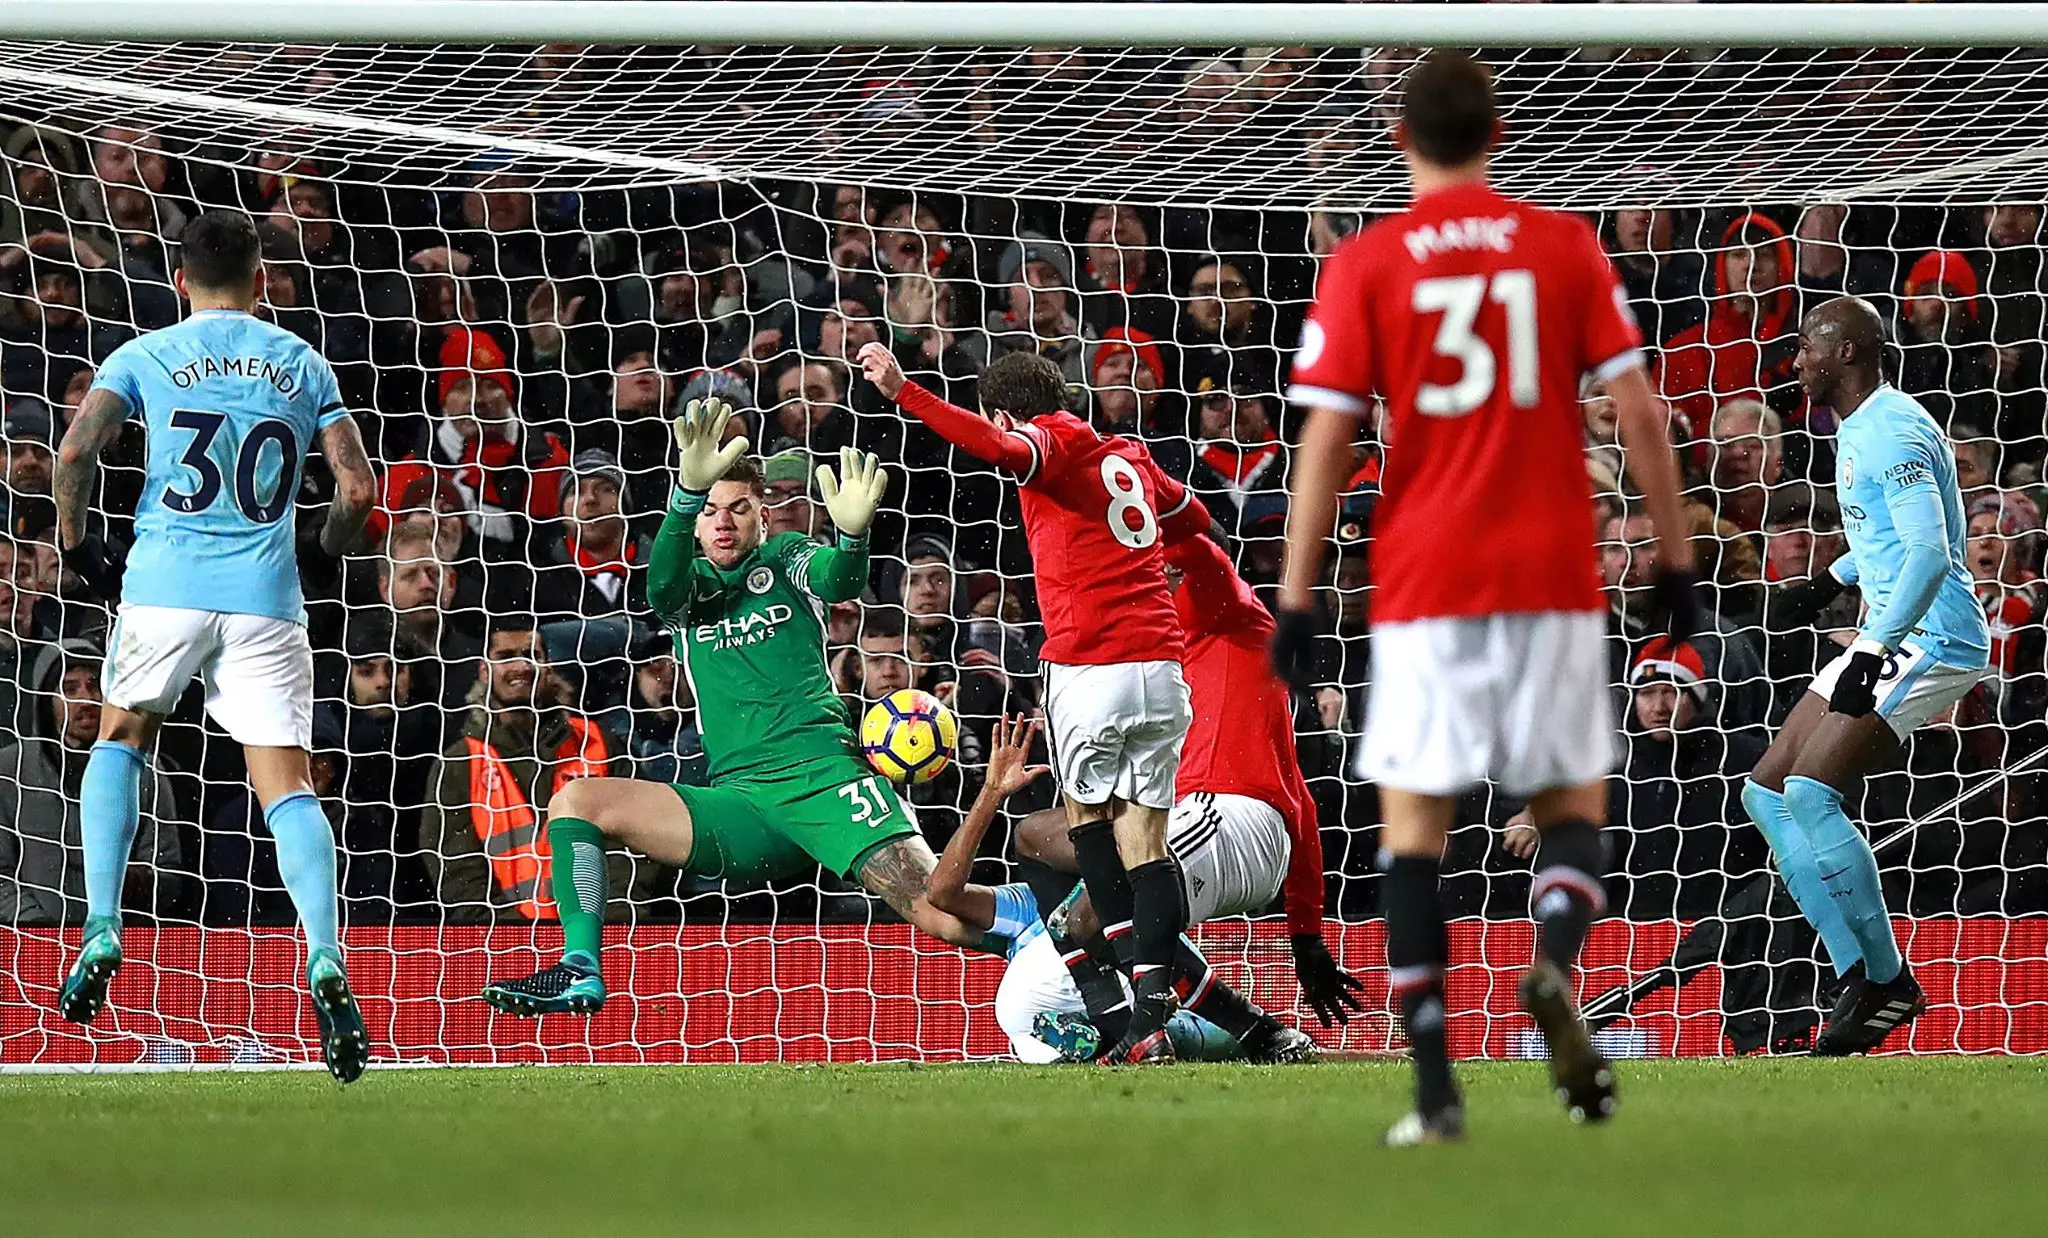 Ederson saves a shot against United. Image: PA